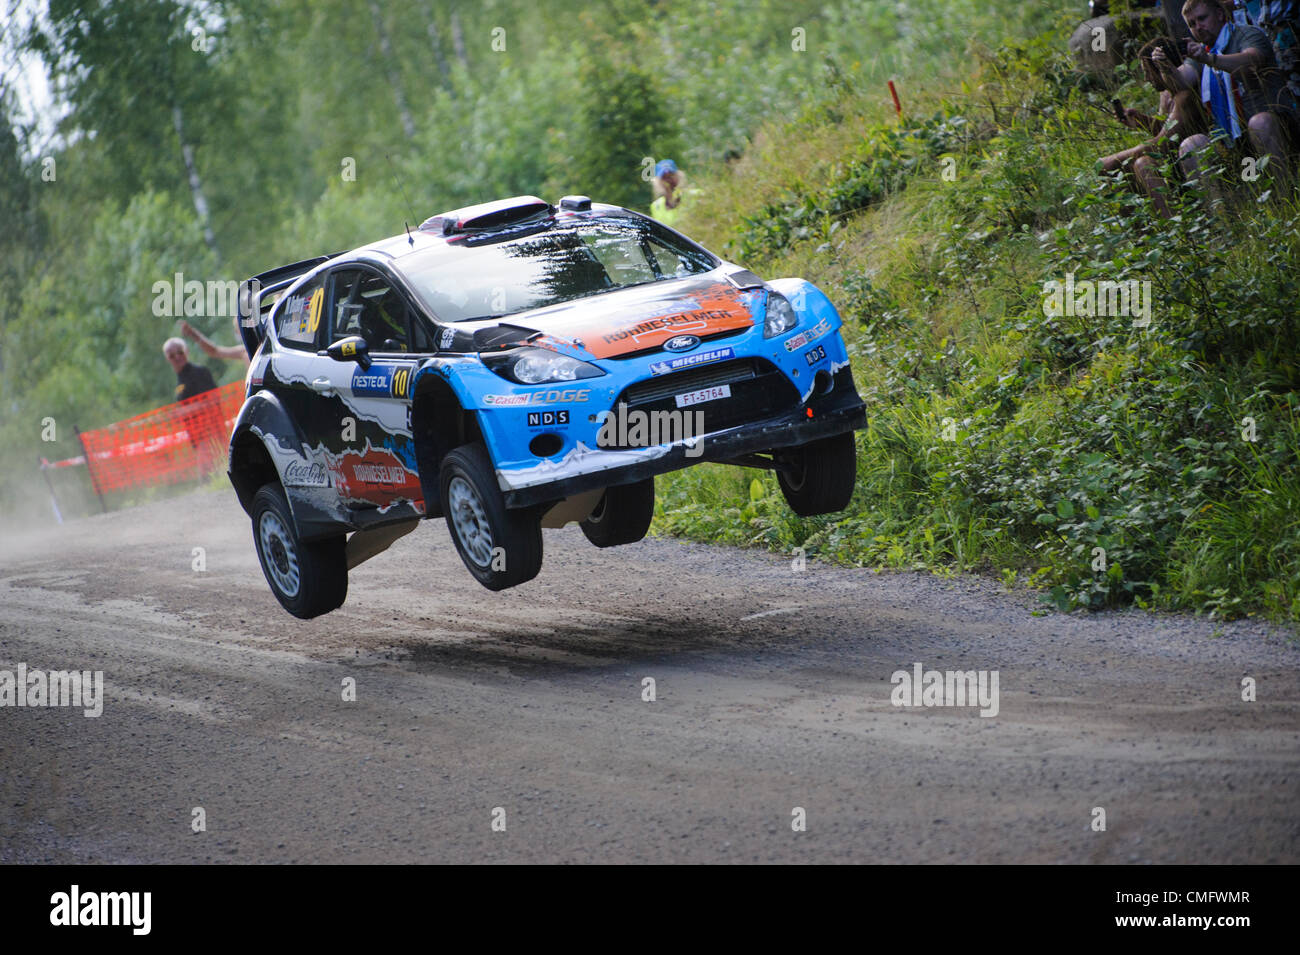 JYVÄSKYLÄ, FINLAND - August 4: Mads Östberg of Norway and Jonas Andersson of Sweden compete in their Adapta World Rally Team Ford Fiesta RS WRC during Day 3 of the WRC Rally Finland on August 4, 2012 in Jyväskylä , Finland Stock Photo